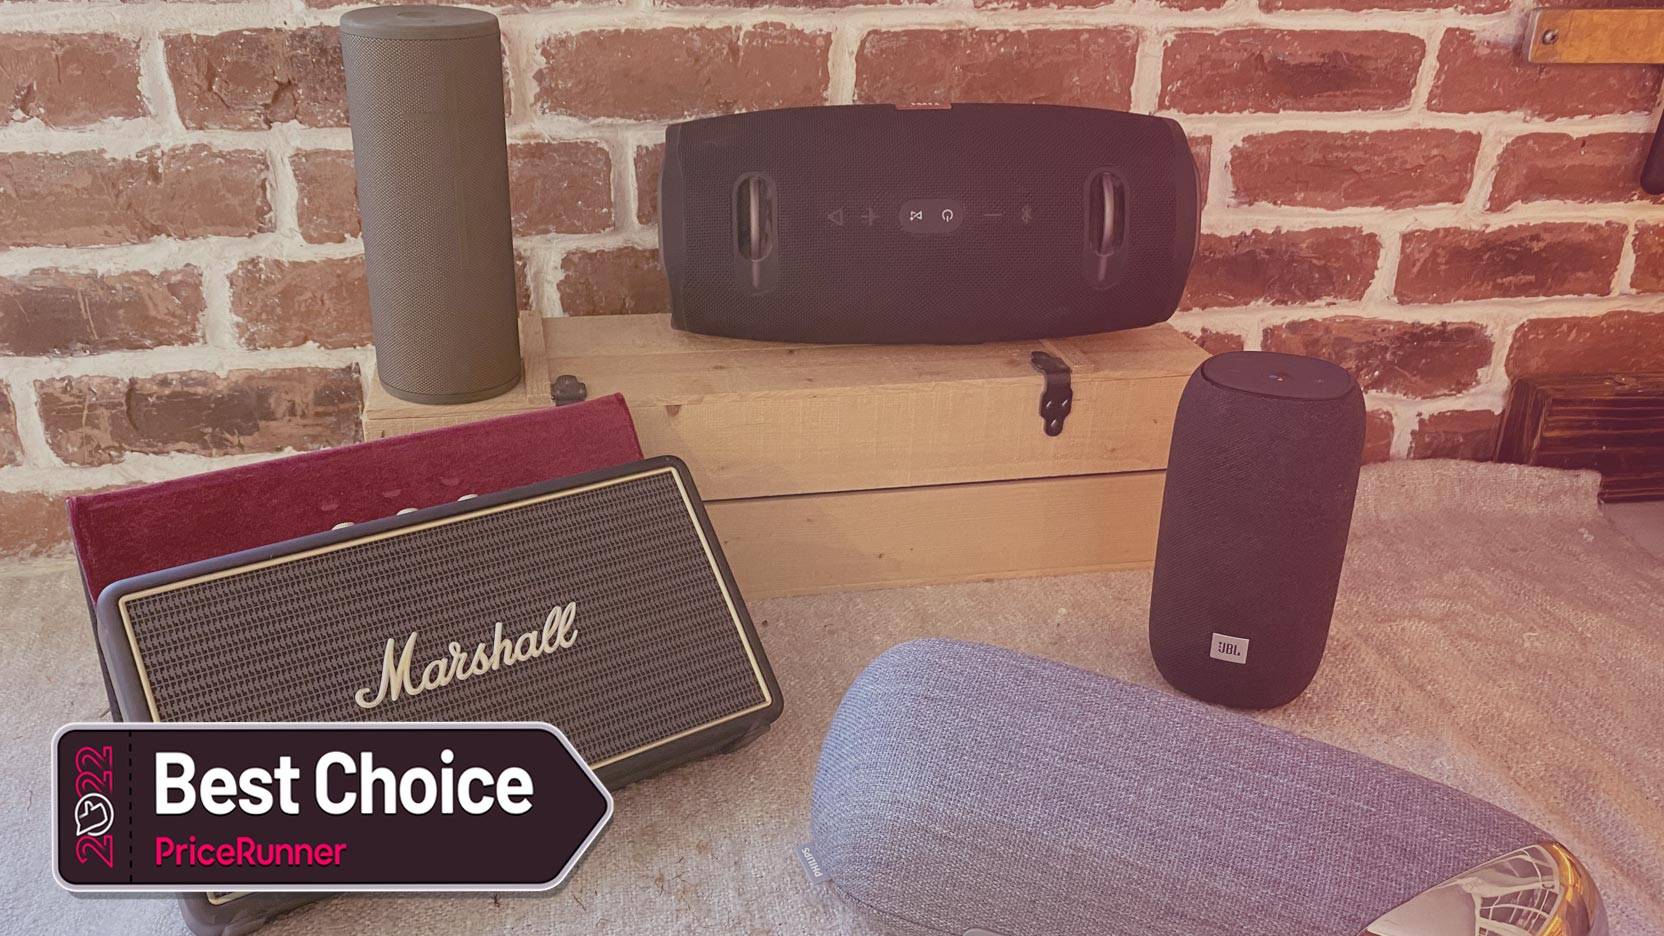 JBL Clip 4 vs JBL Go 3 Review - Portable speakers put to the test